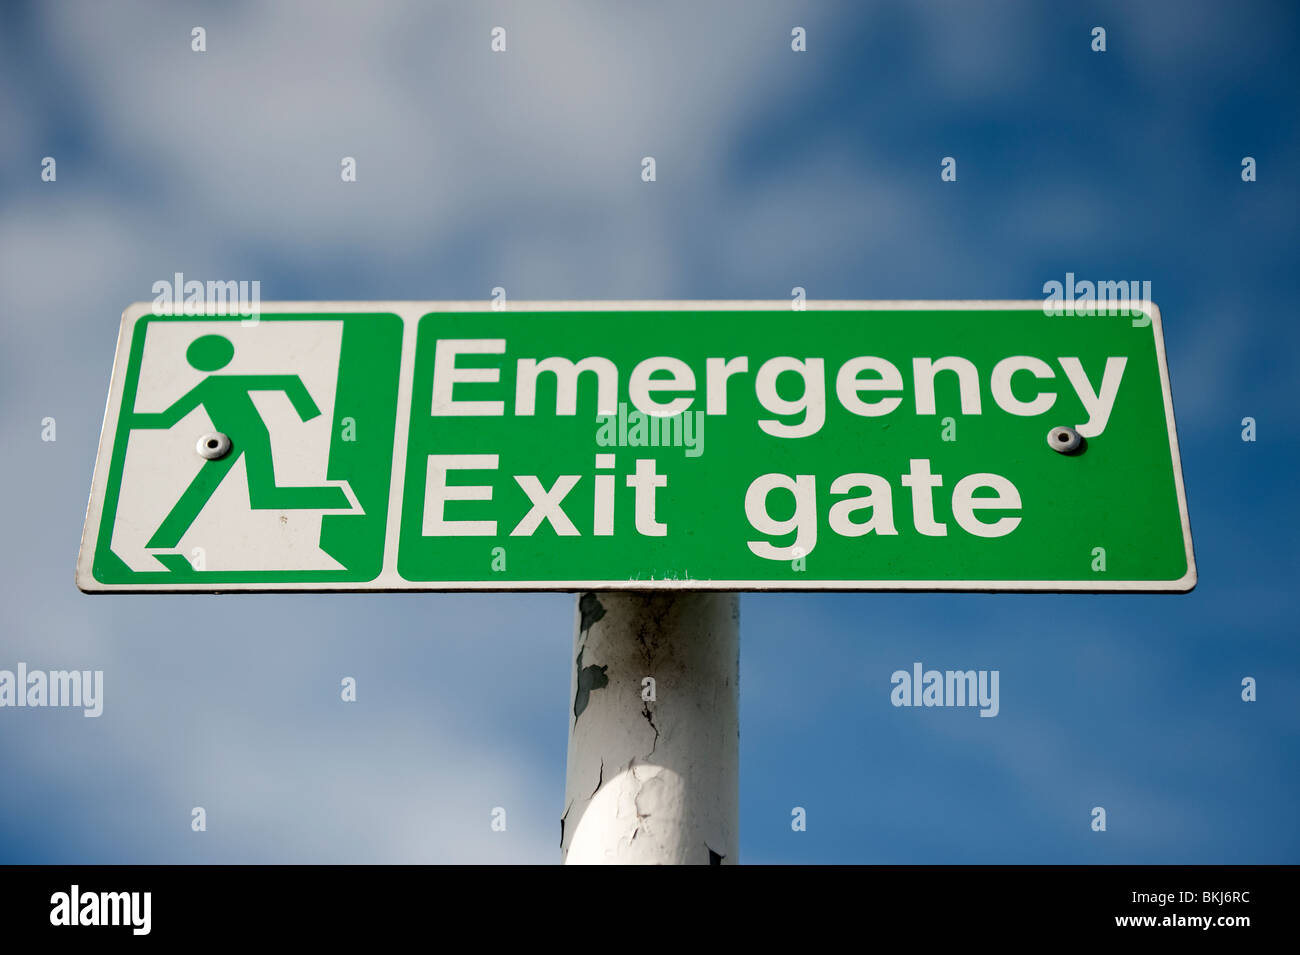 Emergency Exit Gate sign Stock Photo